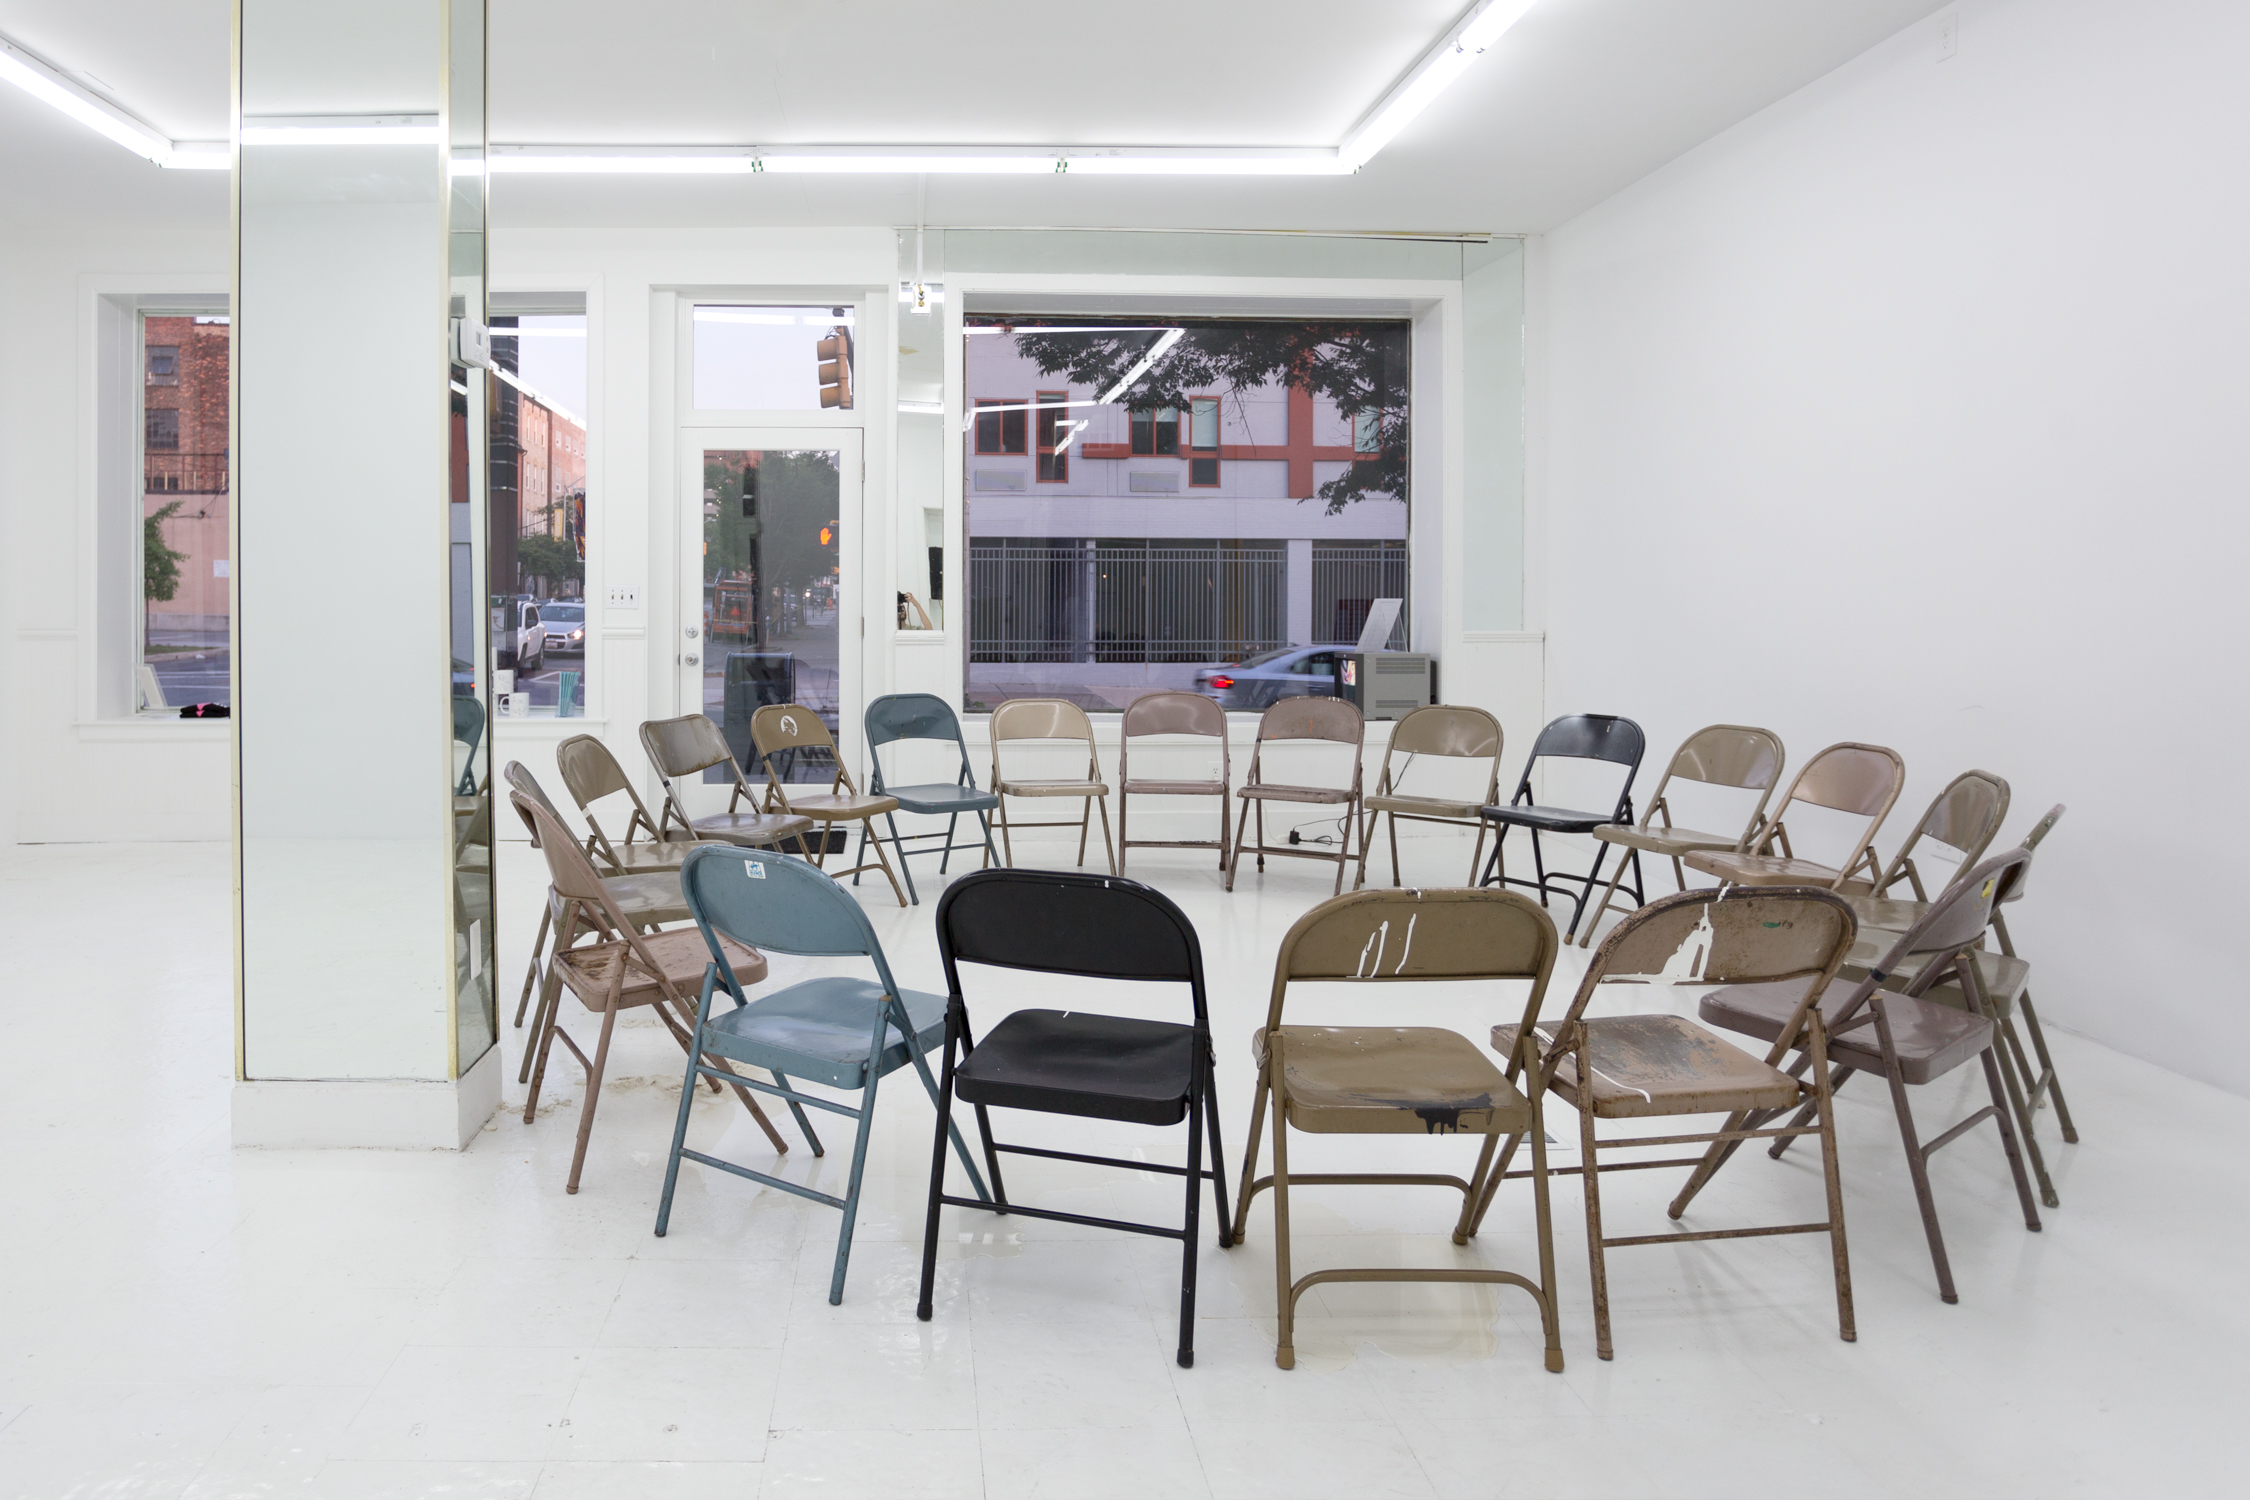 There is a circle of folding chairs in the gallery